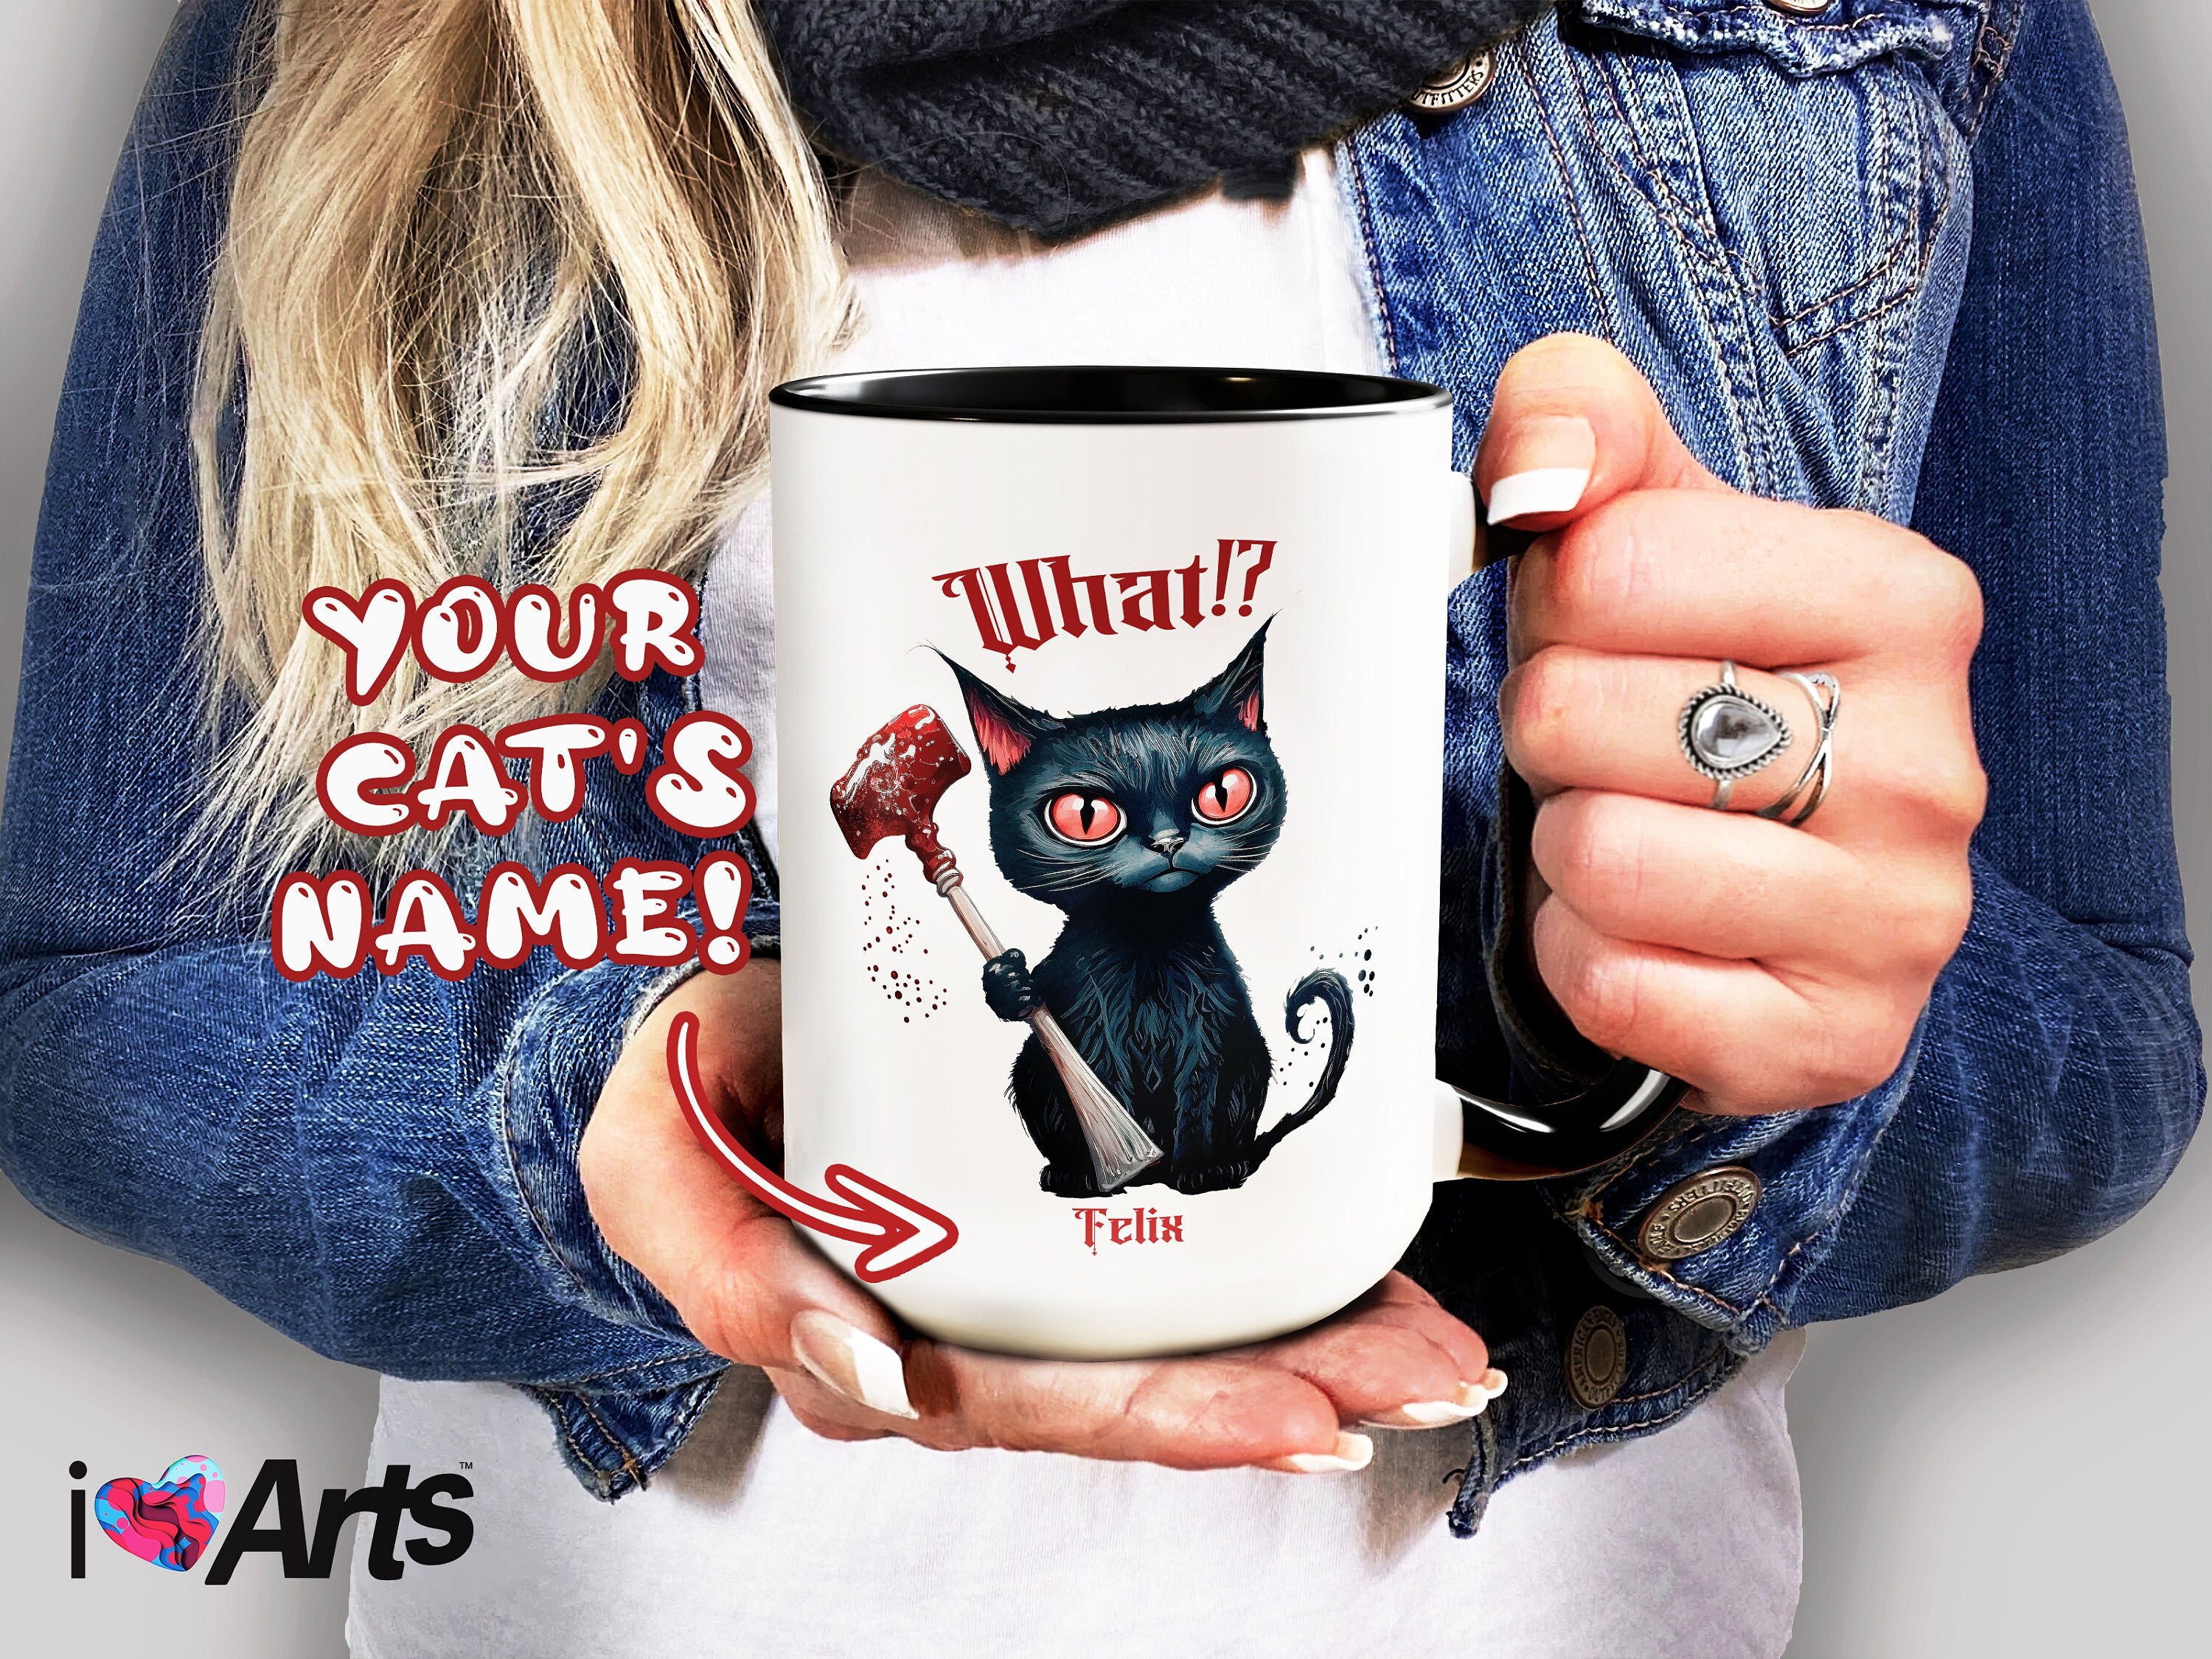 Goth Gifts for Women - Cat Gothic Tumbler Coffee Mug for Women - Cat Lover Gifts for Women - 20 oz Stainless Steel Insulated Cat Cup with Lid and